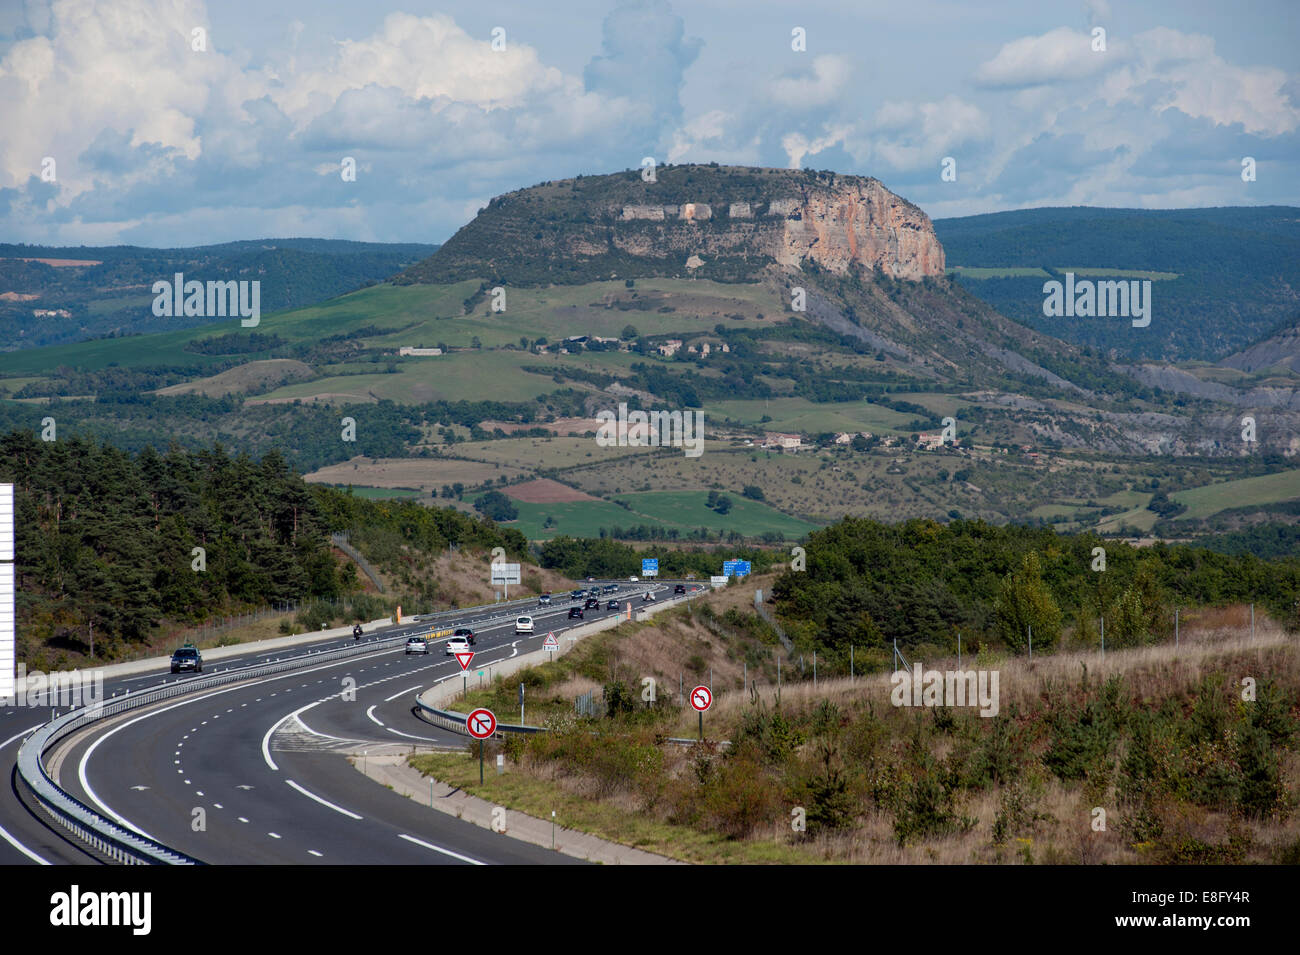 France A75 Autoroute looking north towards Volcanic Plug in Gorges du Tarn area, north of Millau. September 2014 Stock Photo